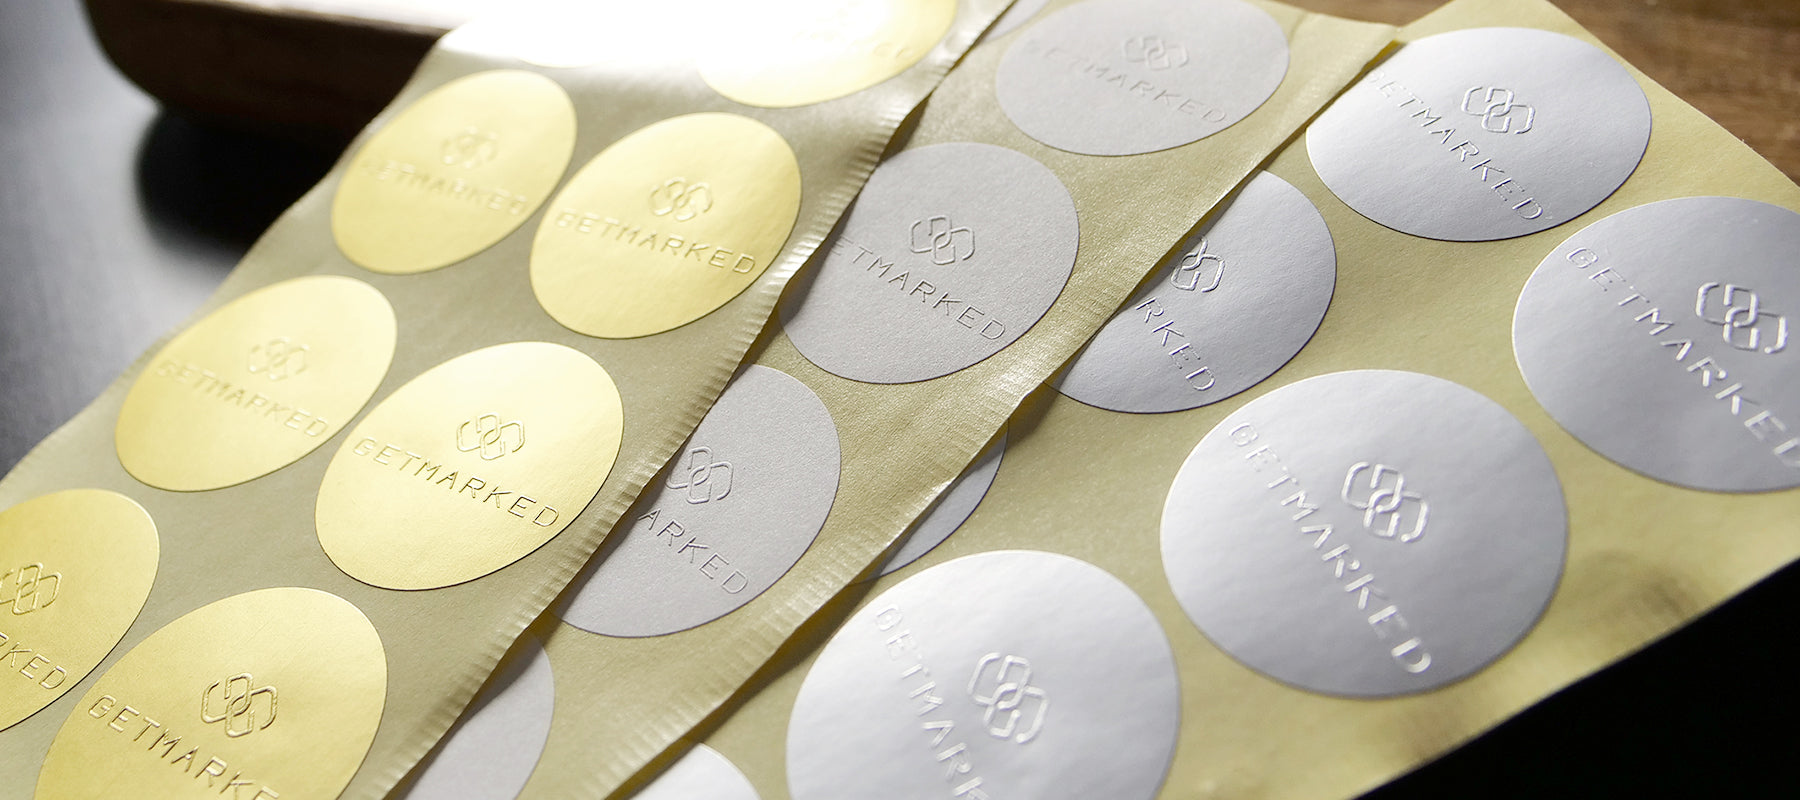 Functional & Elegant Embossed Stickers, perfect for your wedding, baby showers & special occasions.